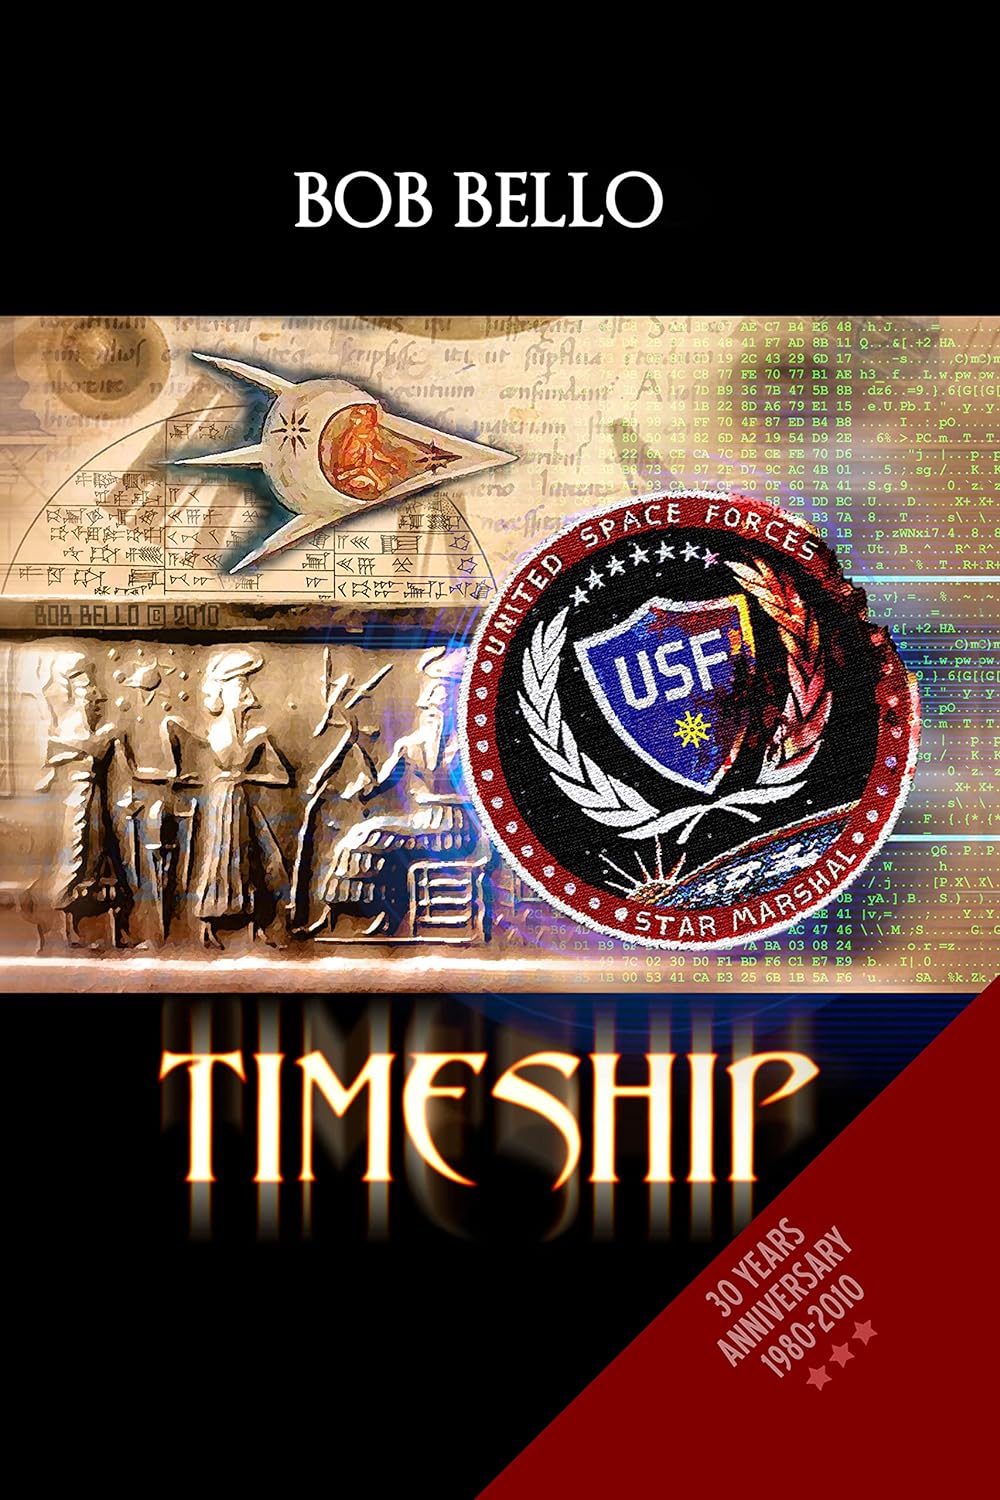 Timeship by Bob Bello: A Time-Bending Sci-Fi Masterpiece Unveiled